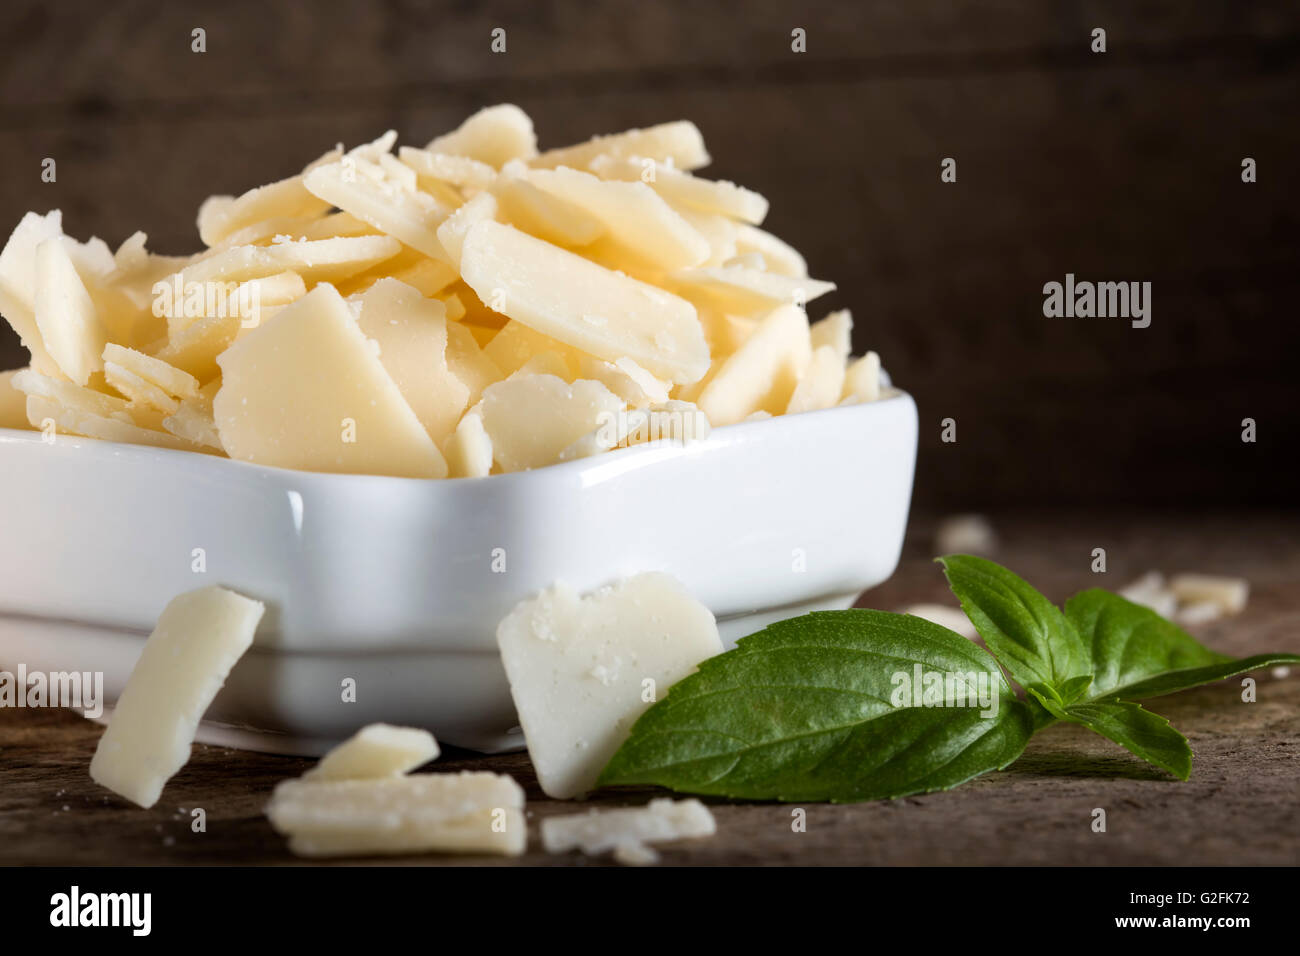 Bowl with parmesan cheese flakes on rustic table Stock Photo